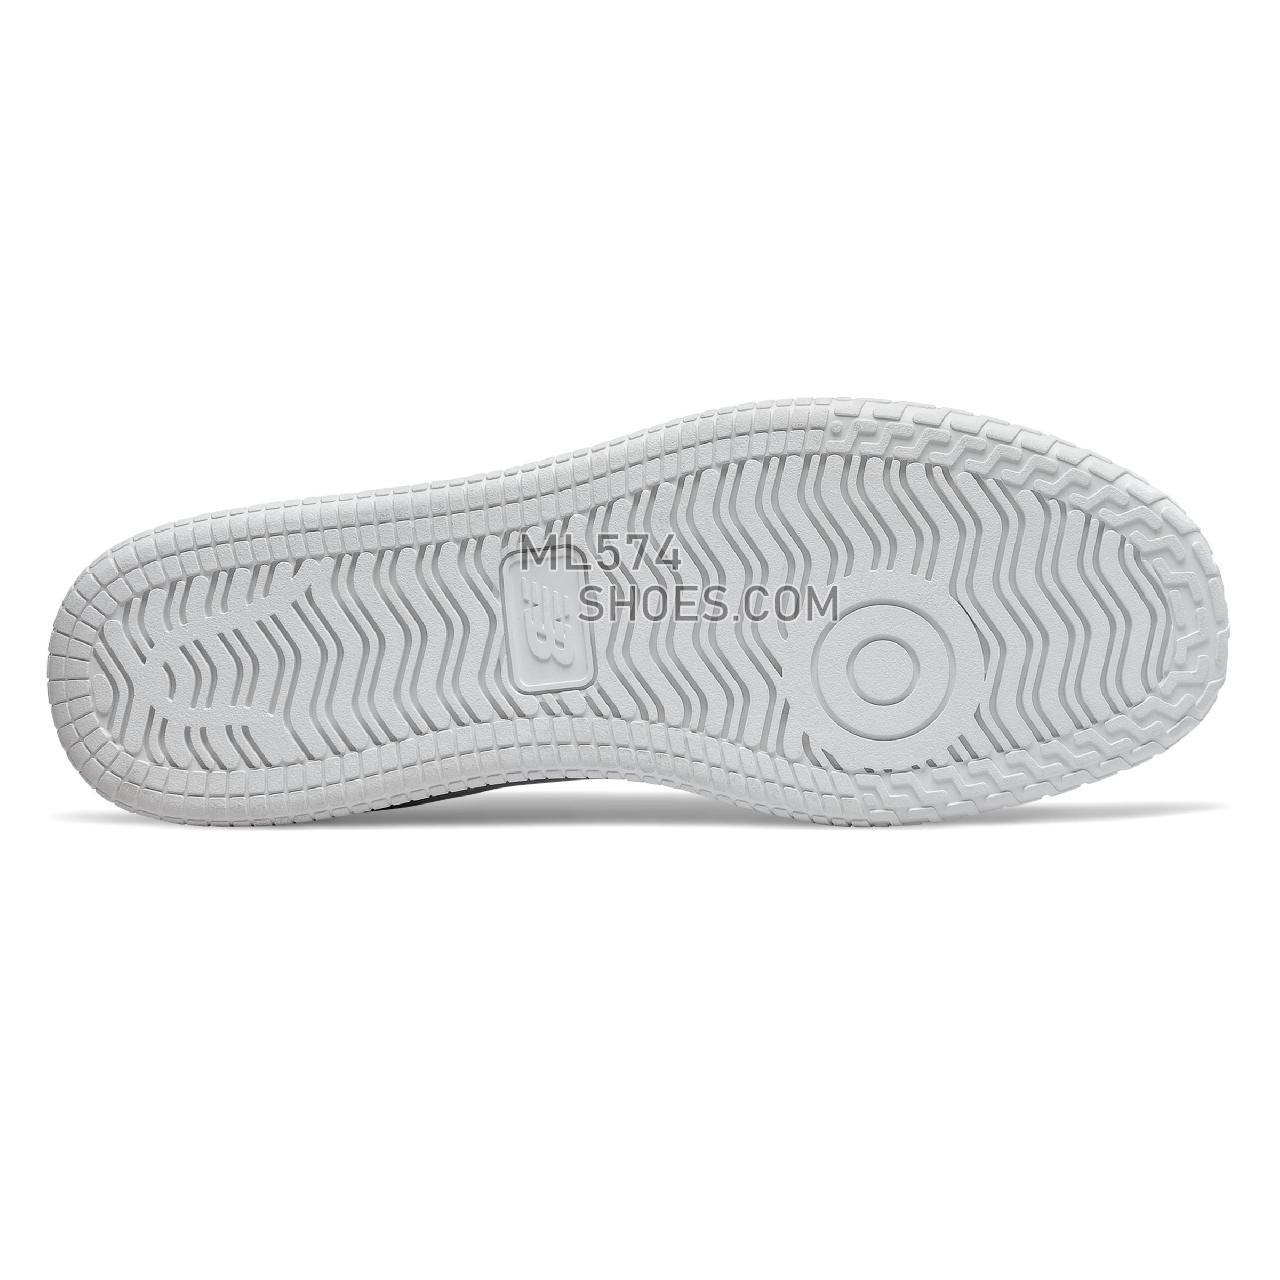 New Balance CT Alley - Men's CT Alley Classic - White with Black - CTALYMSJ